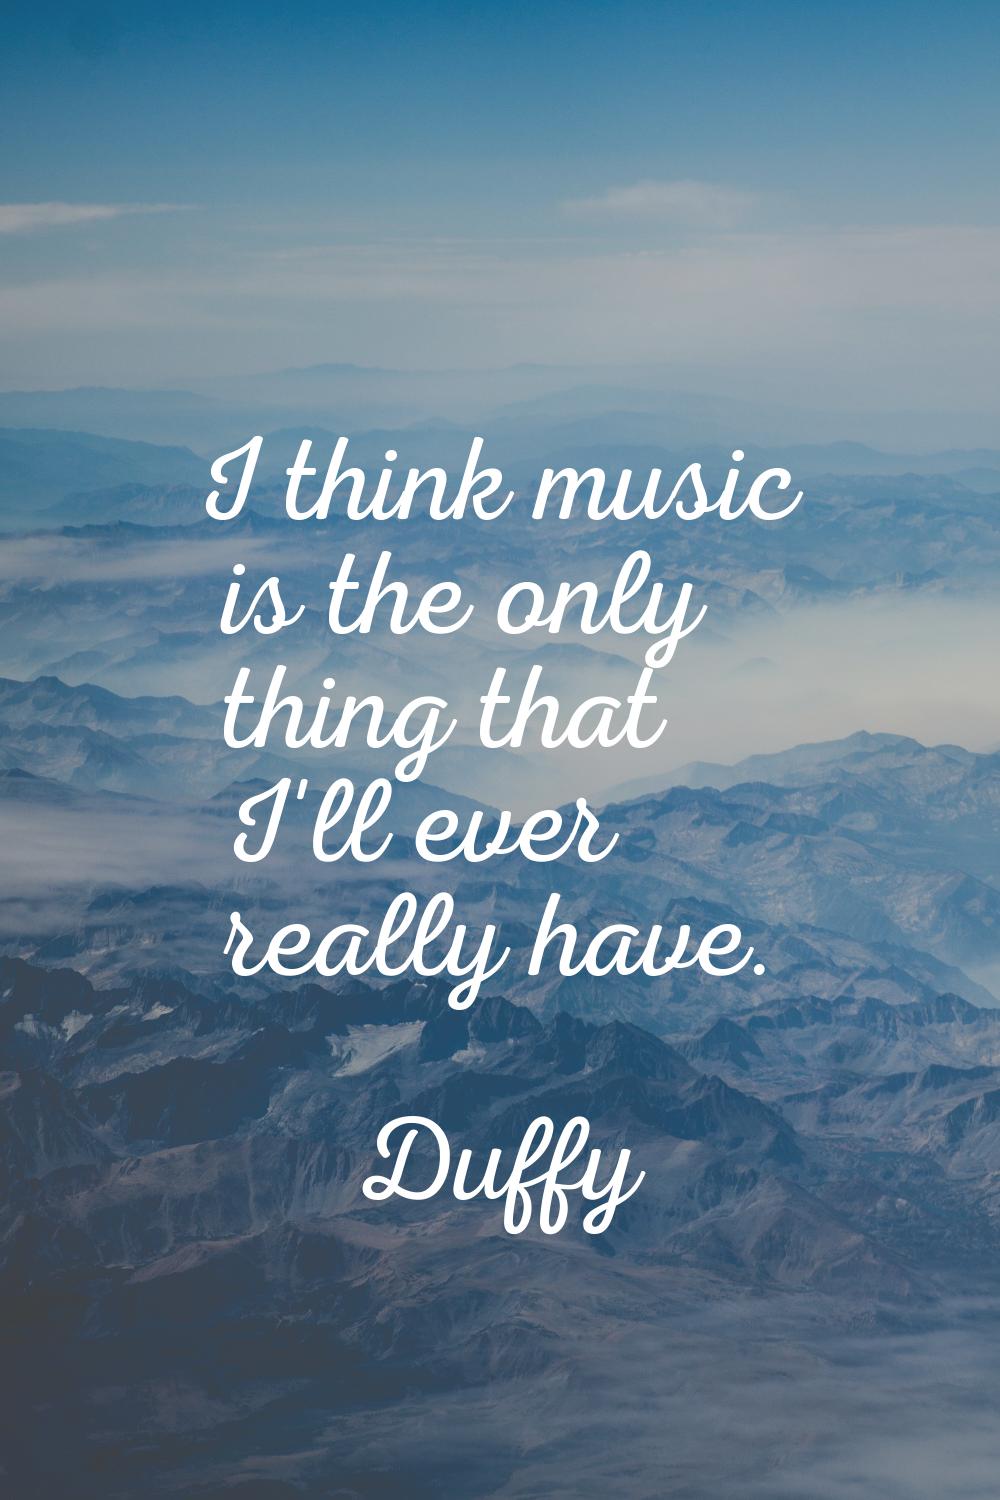 I think music is the only thing that I'll ever really have.